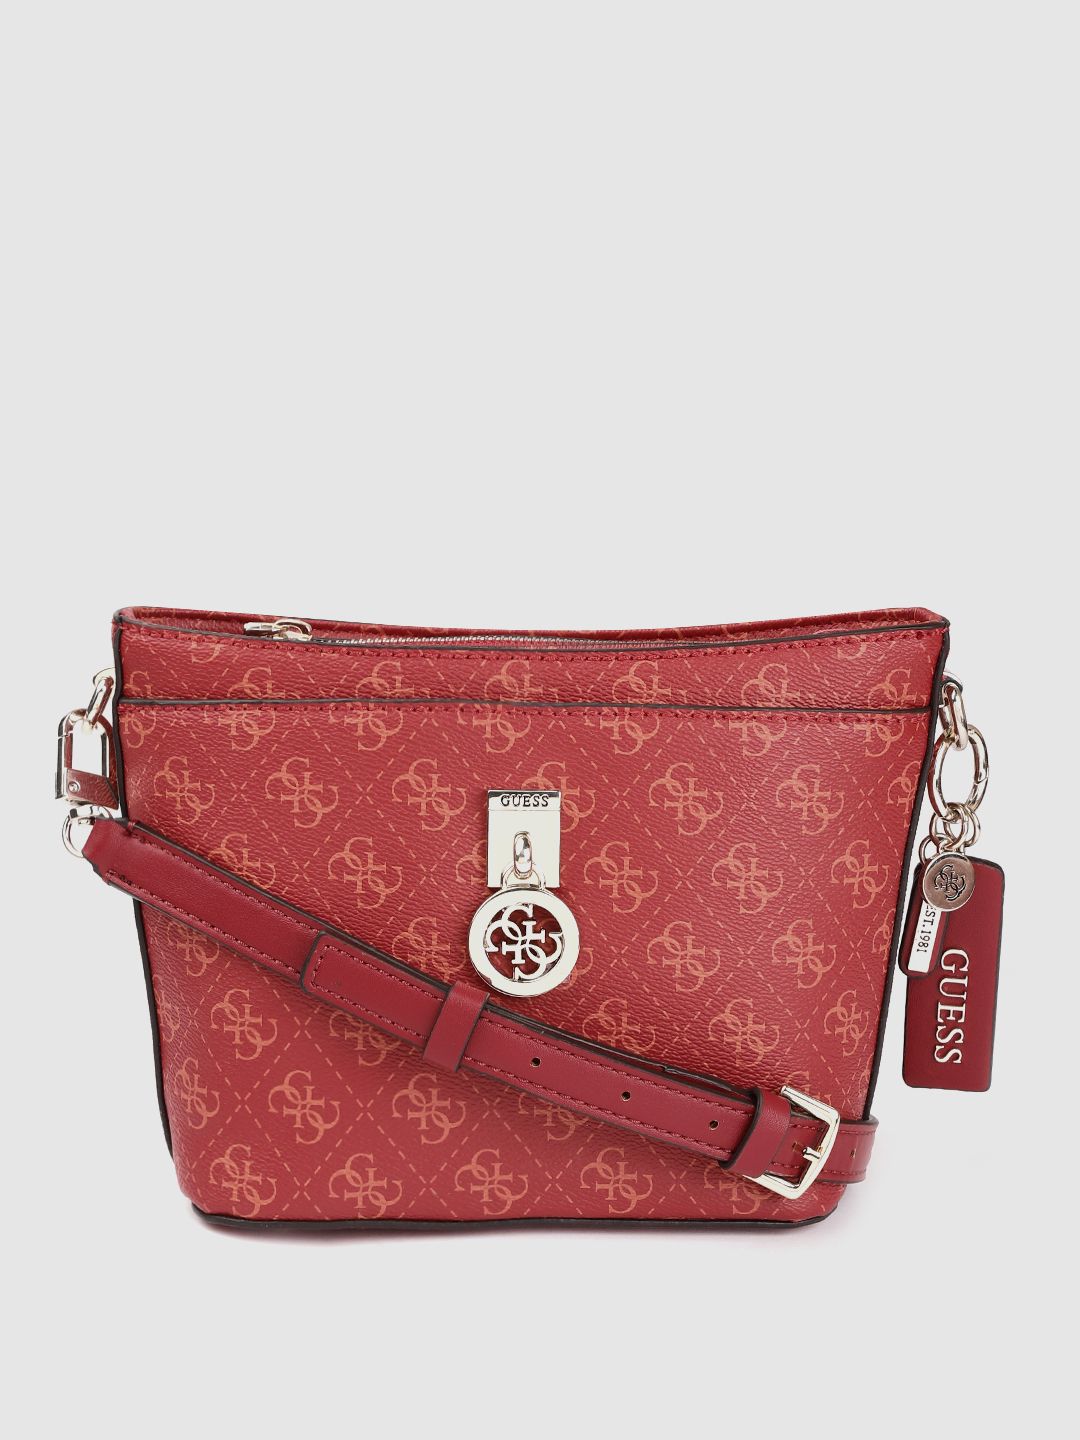 GUESS Red & Orange Checked Structured Sling Bag with Detachable Sling Strap & Tab Price in India